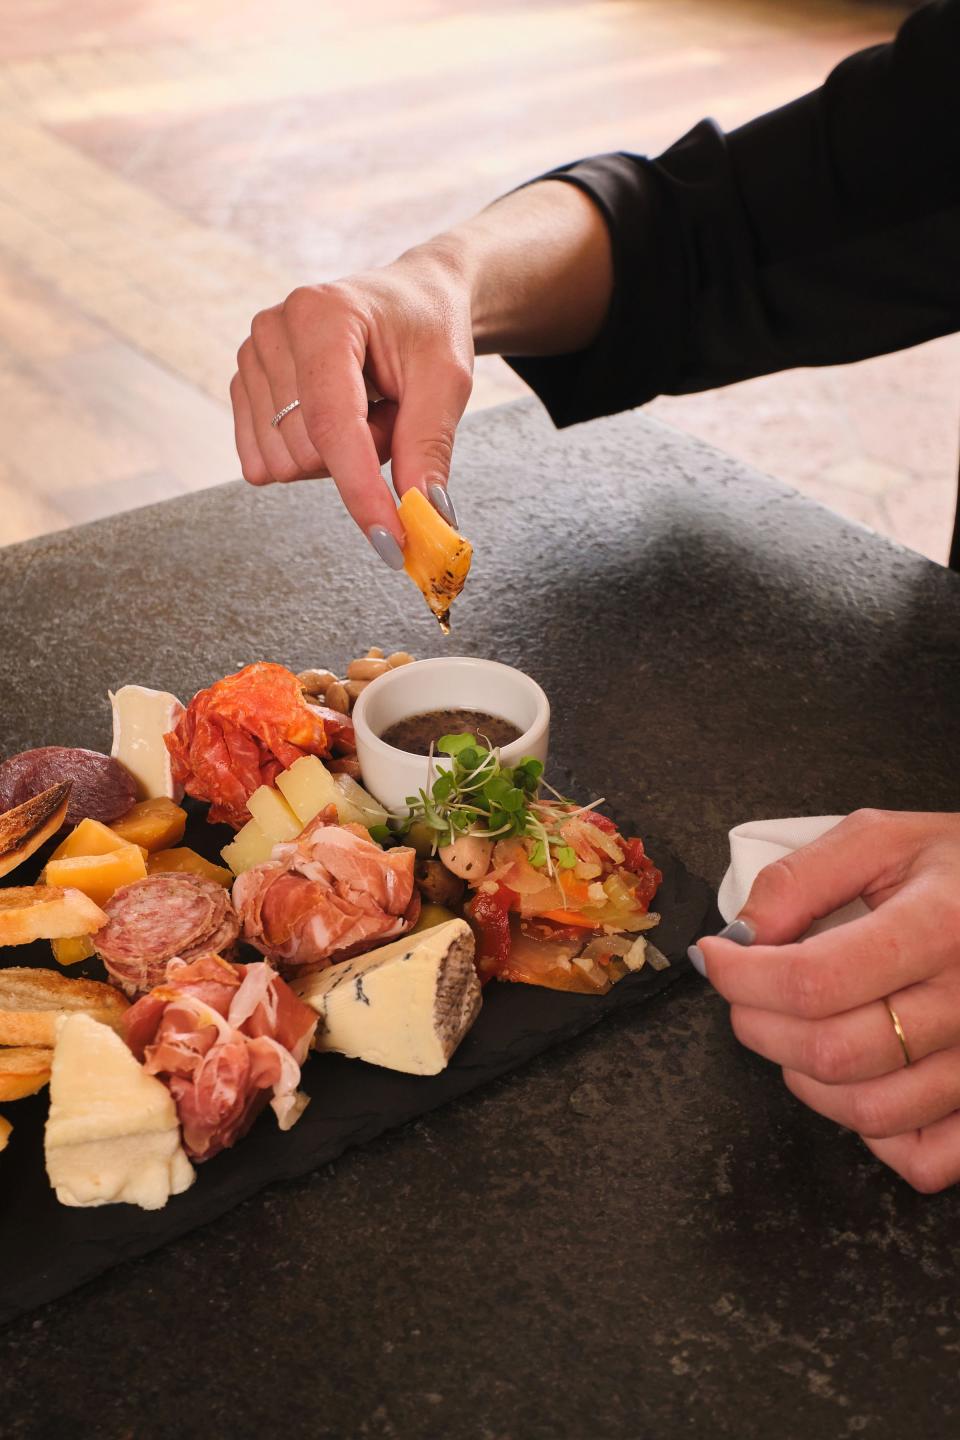 reat mom to a charcuterie board making class on Saturday, May 11, at City Cellar Wine Bar & Grill at The Square in West Palm Beach.